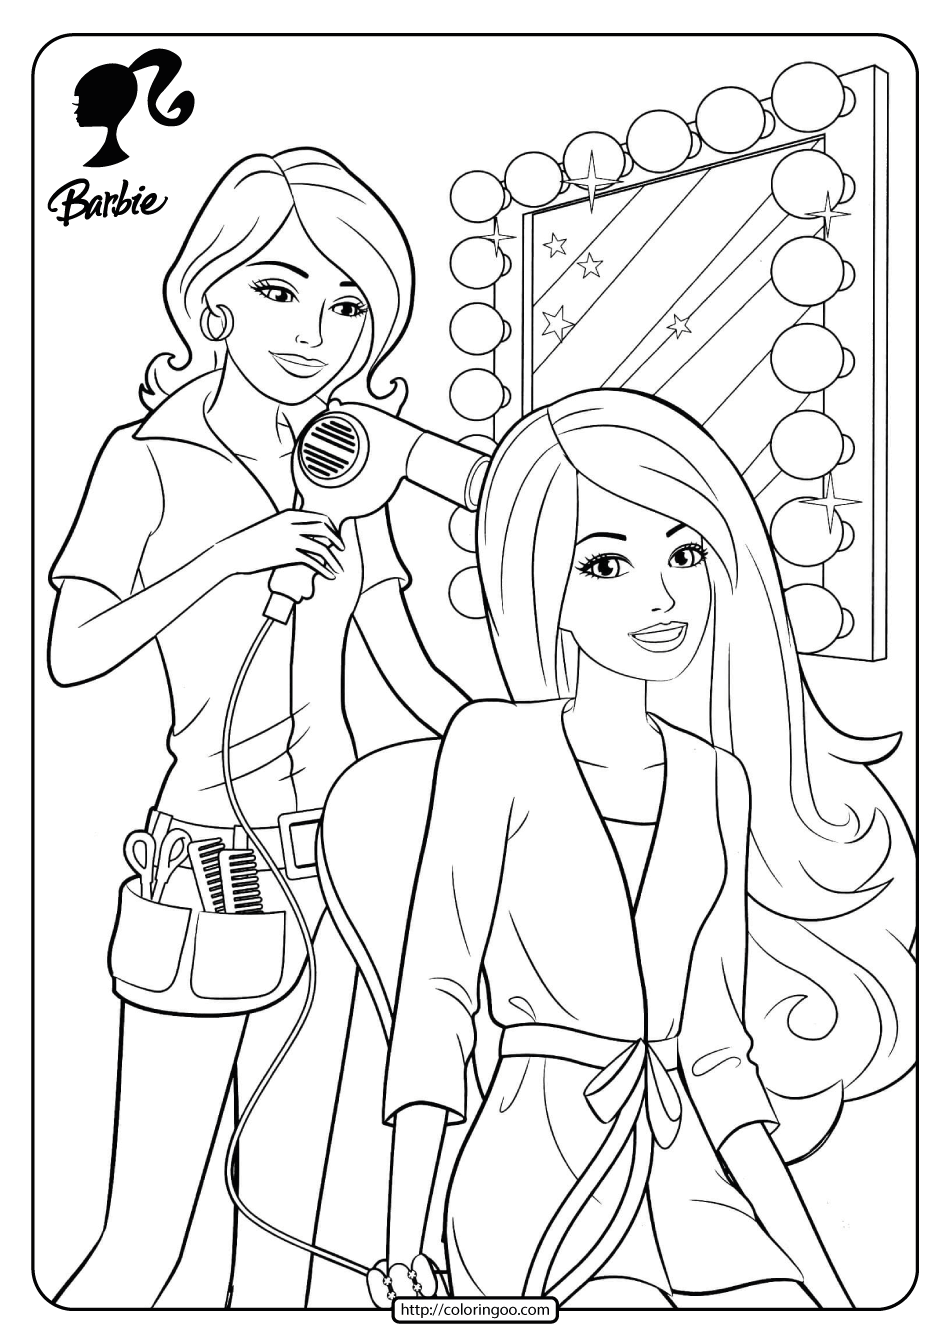 Barbie And Friends Coloring Pages   Coloring Home